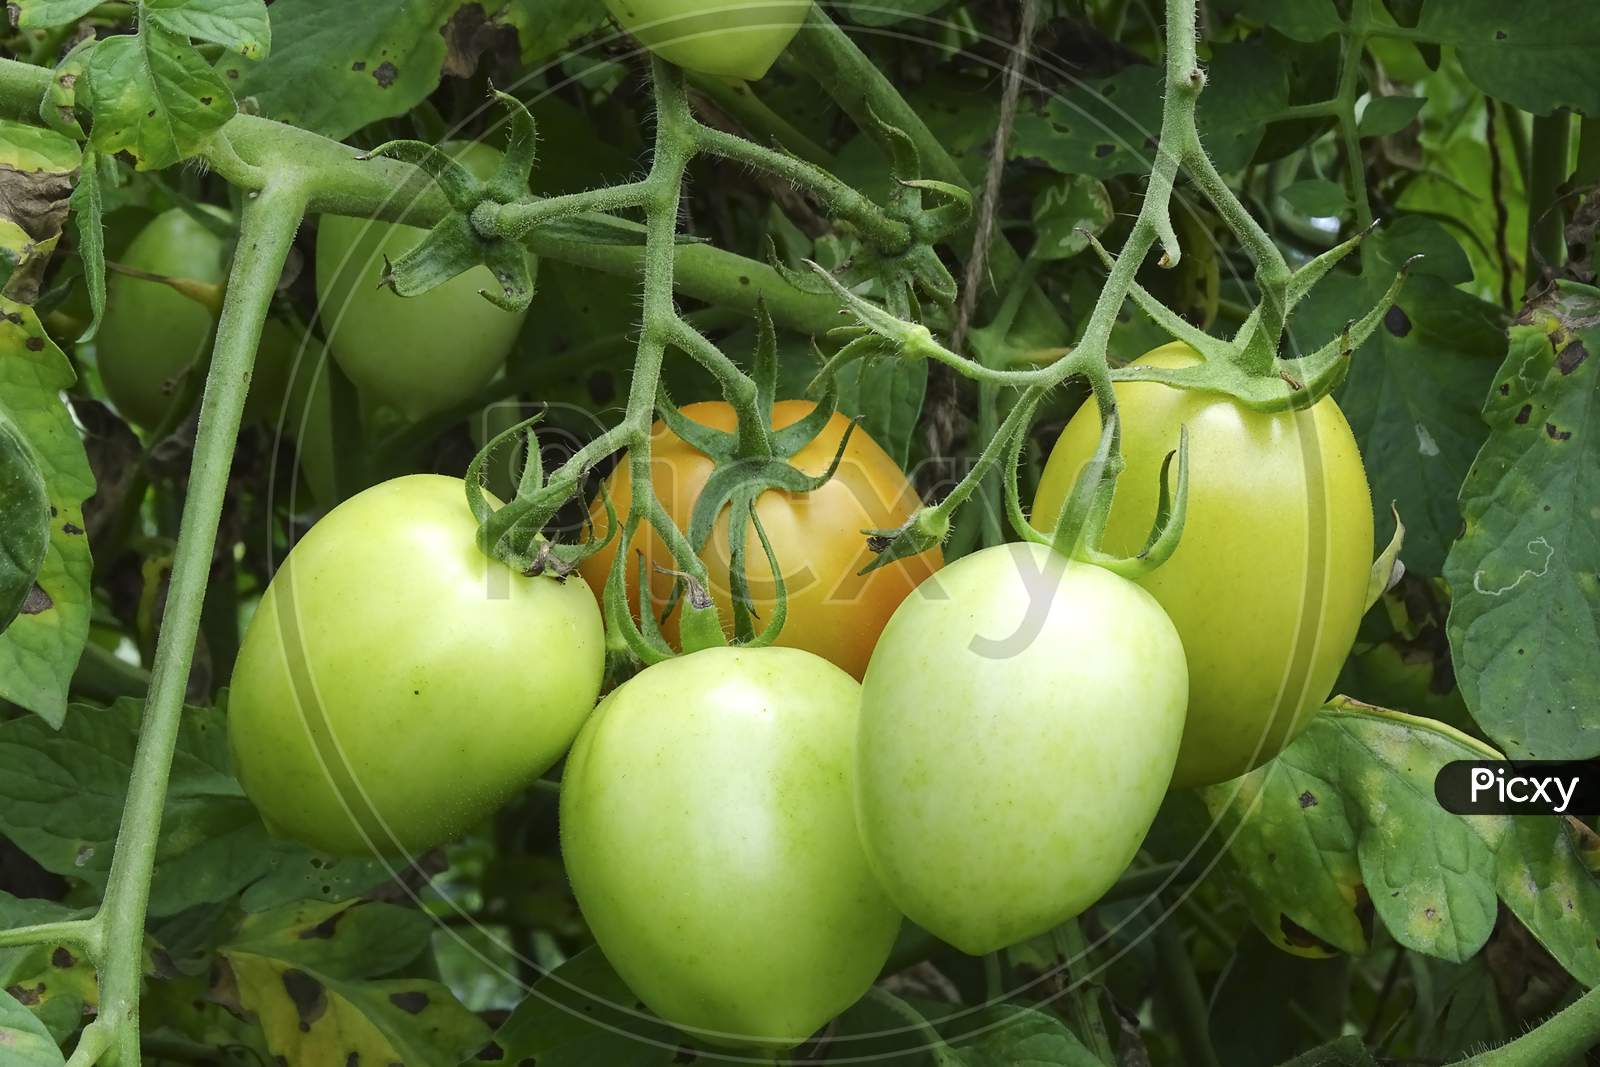 Organic ripe tomatoes on the vine ready to be picked